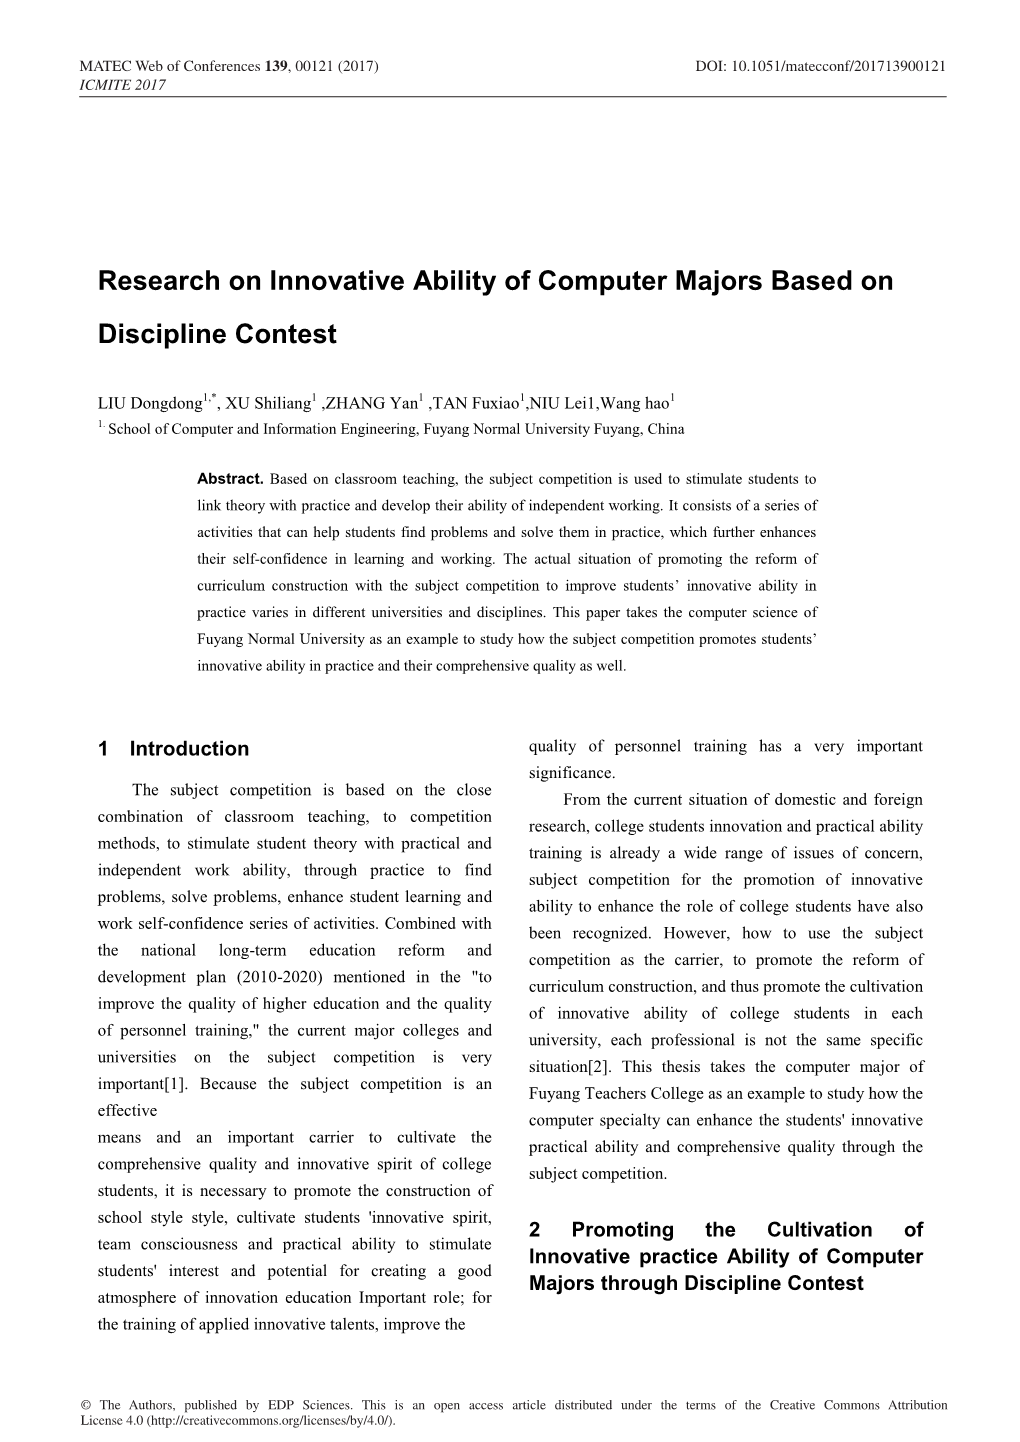 Research on Innovative Ability of Computer Majors Based on Discipline Contest